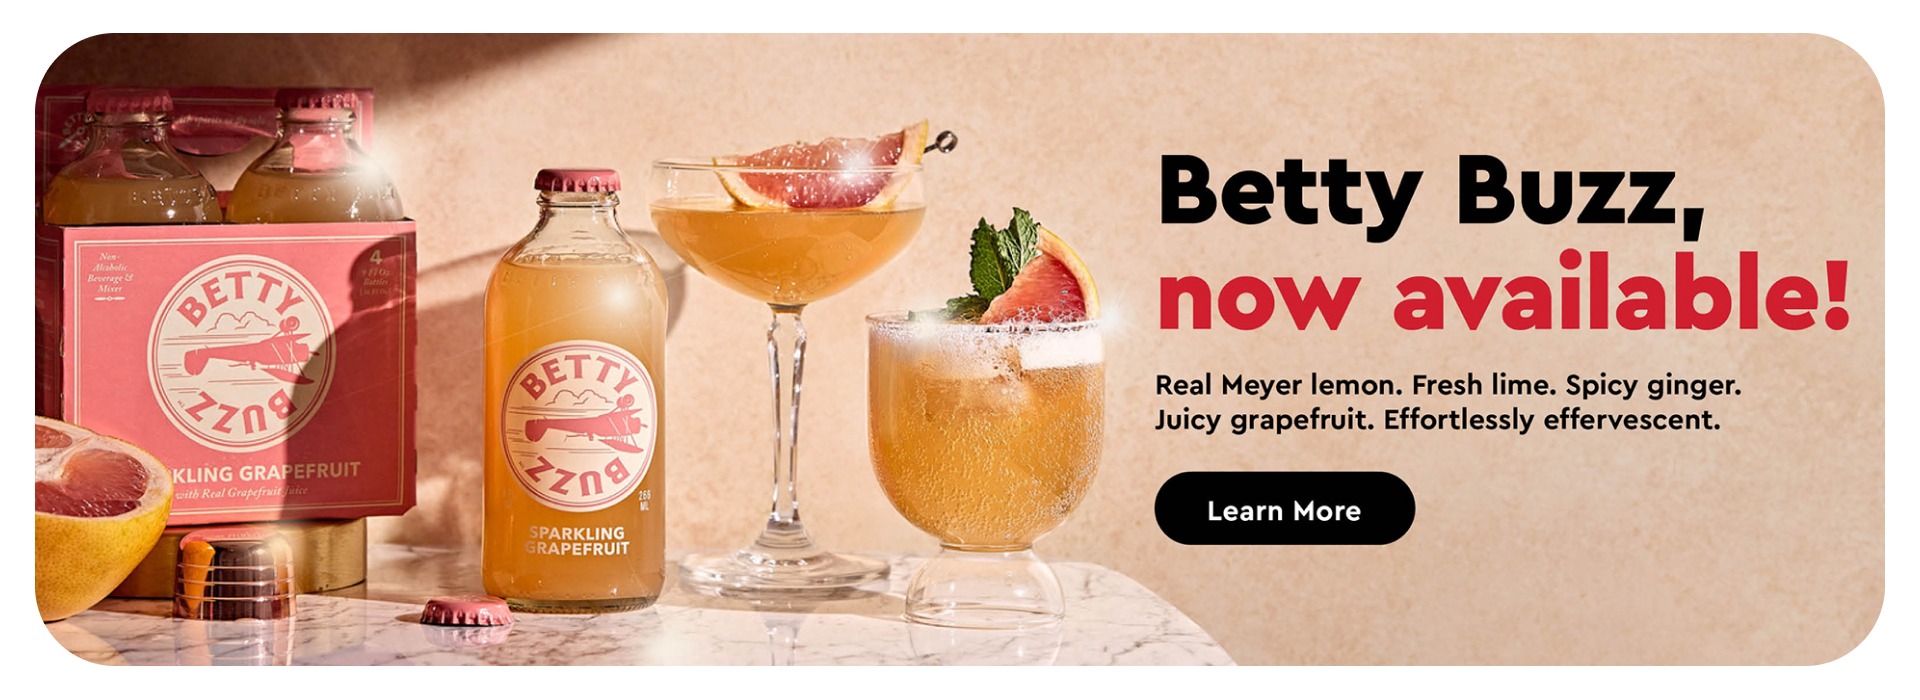 The following image contains the text, " Betty Buzz Now available! Real Meyer lemon. Fresh lime. Spice ginger. Juicy grapefruit. Effortlessly effervescent, along with the Learn More button.